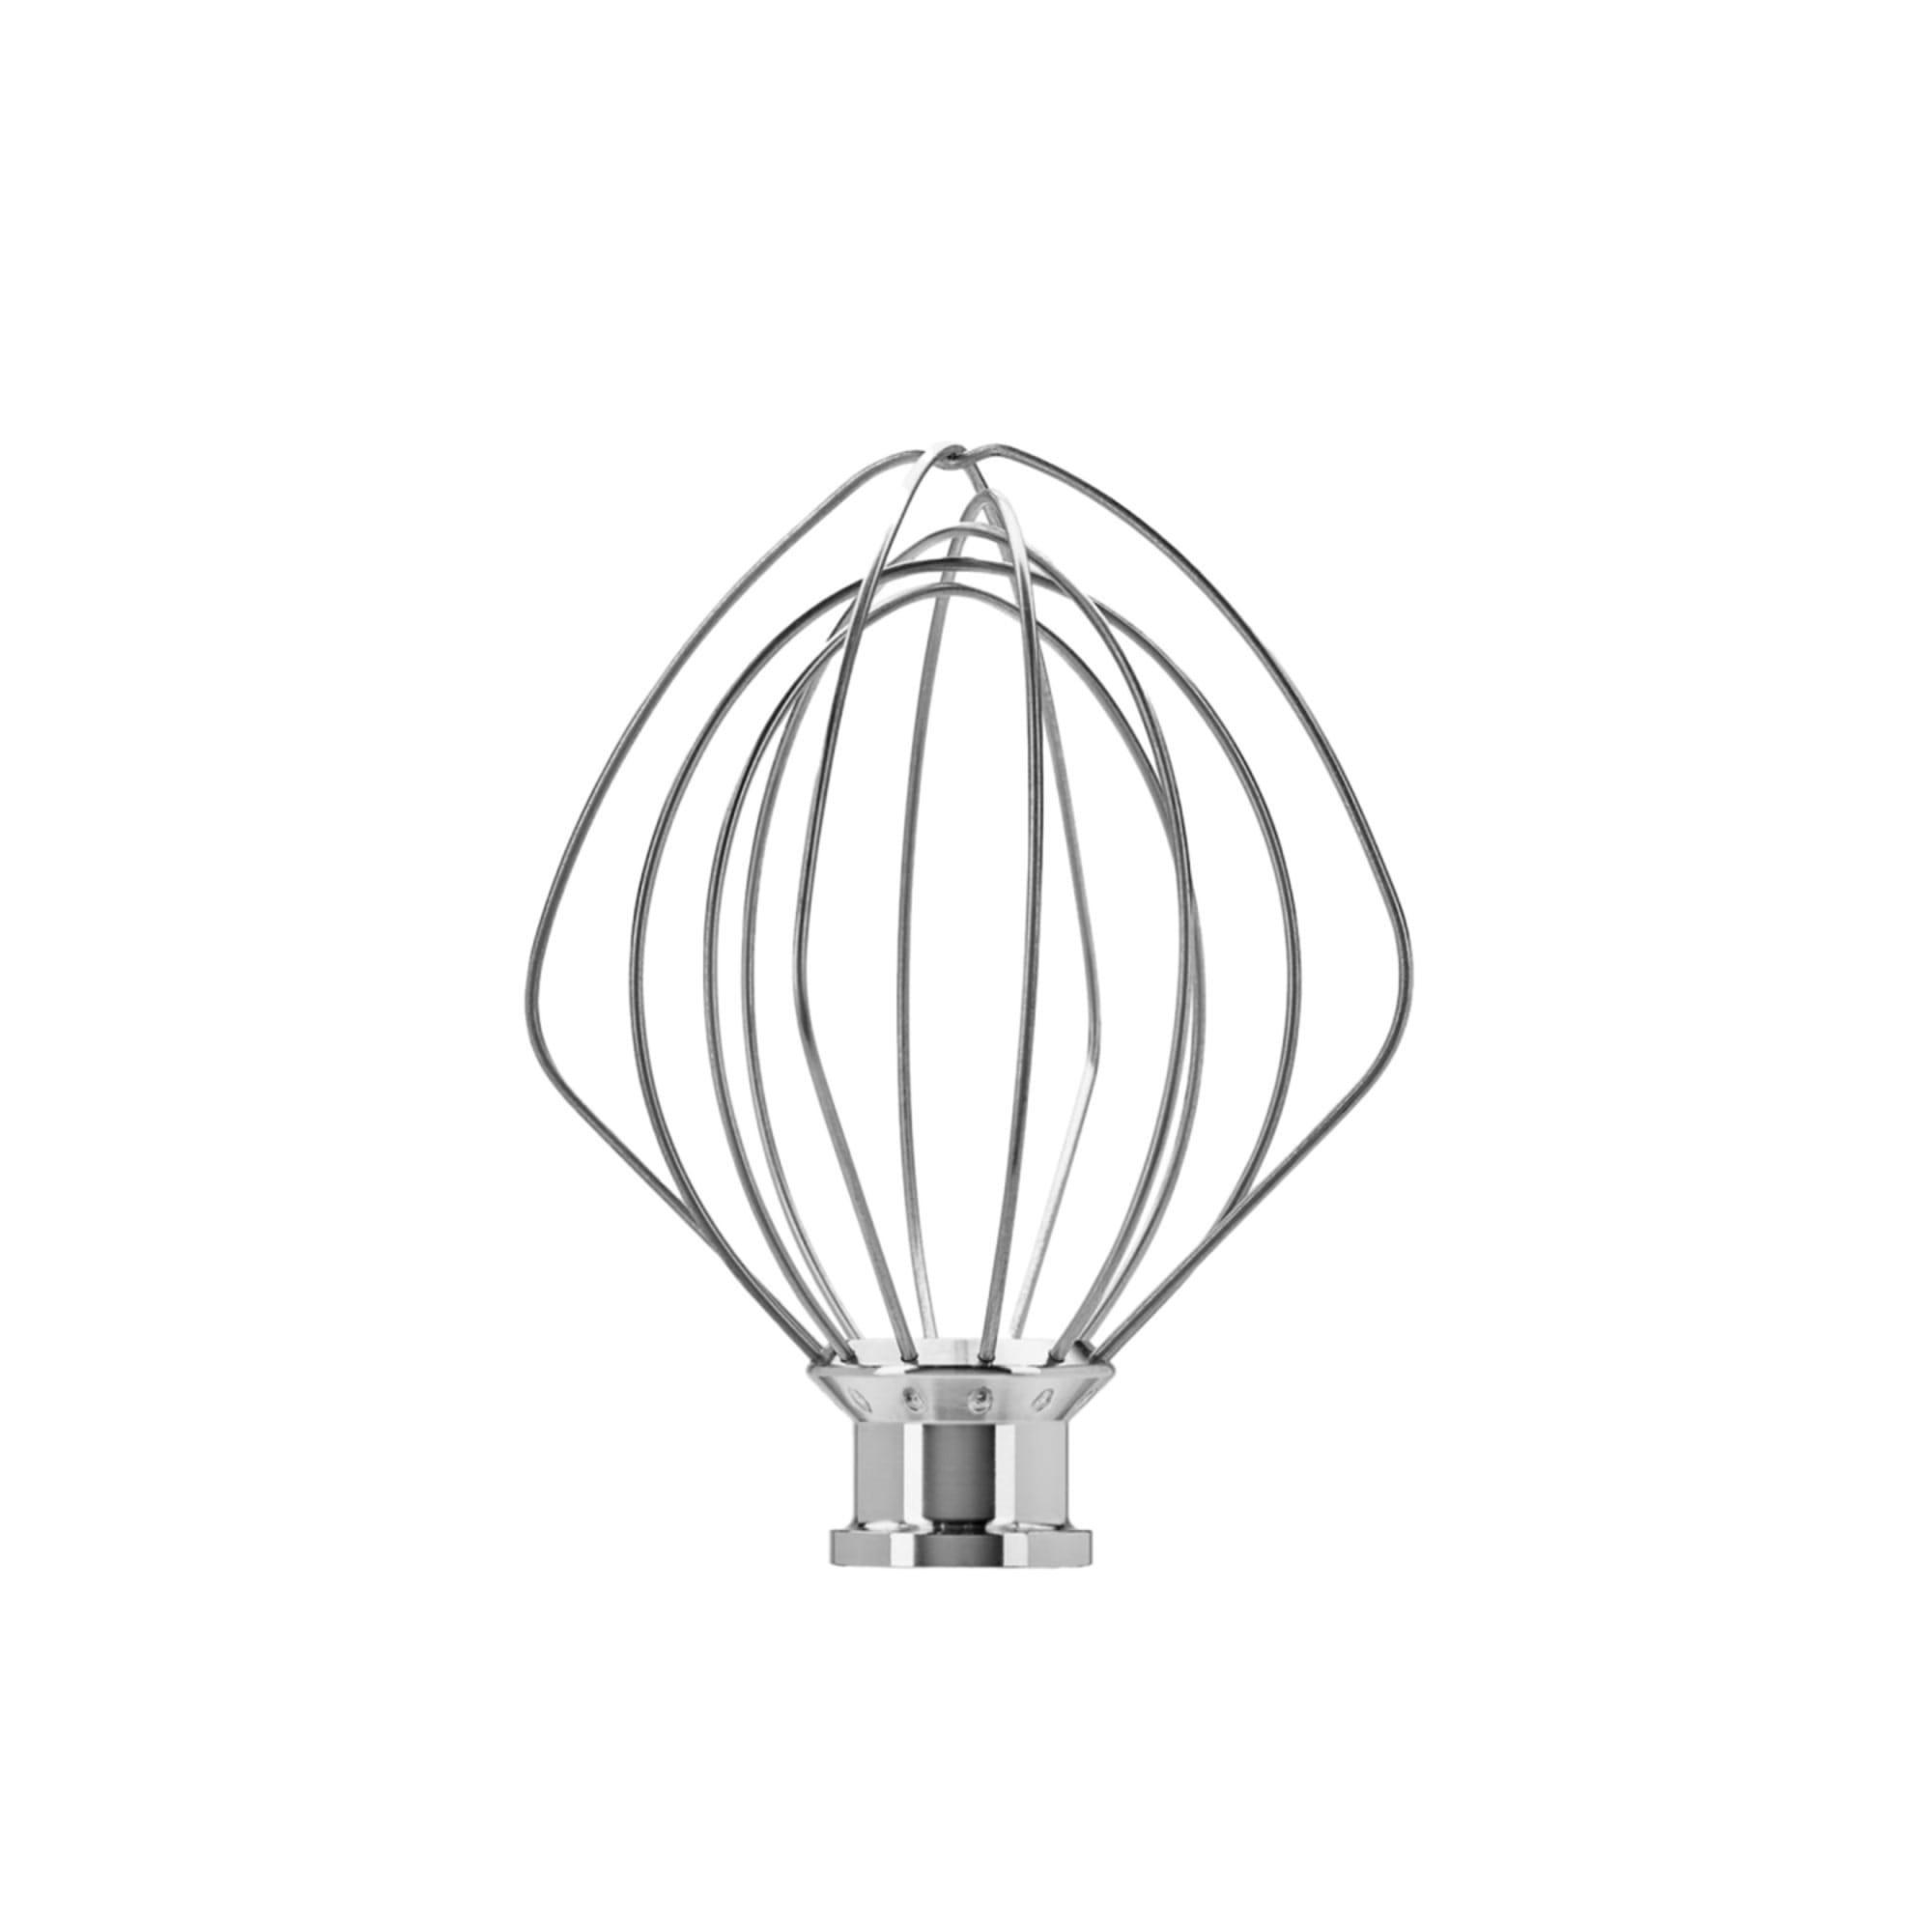 KitchenAid Stainless Steel Wire Whisk for Tilt Head Mixer Image 1